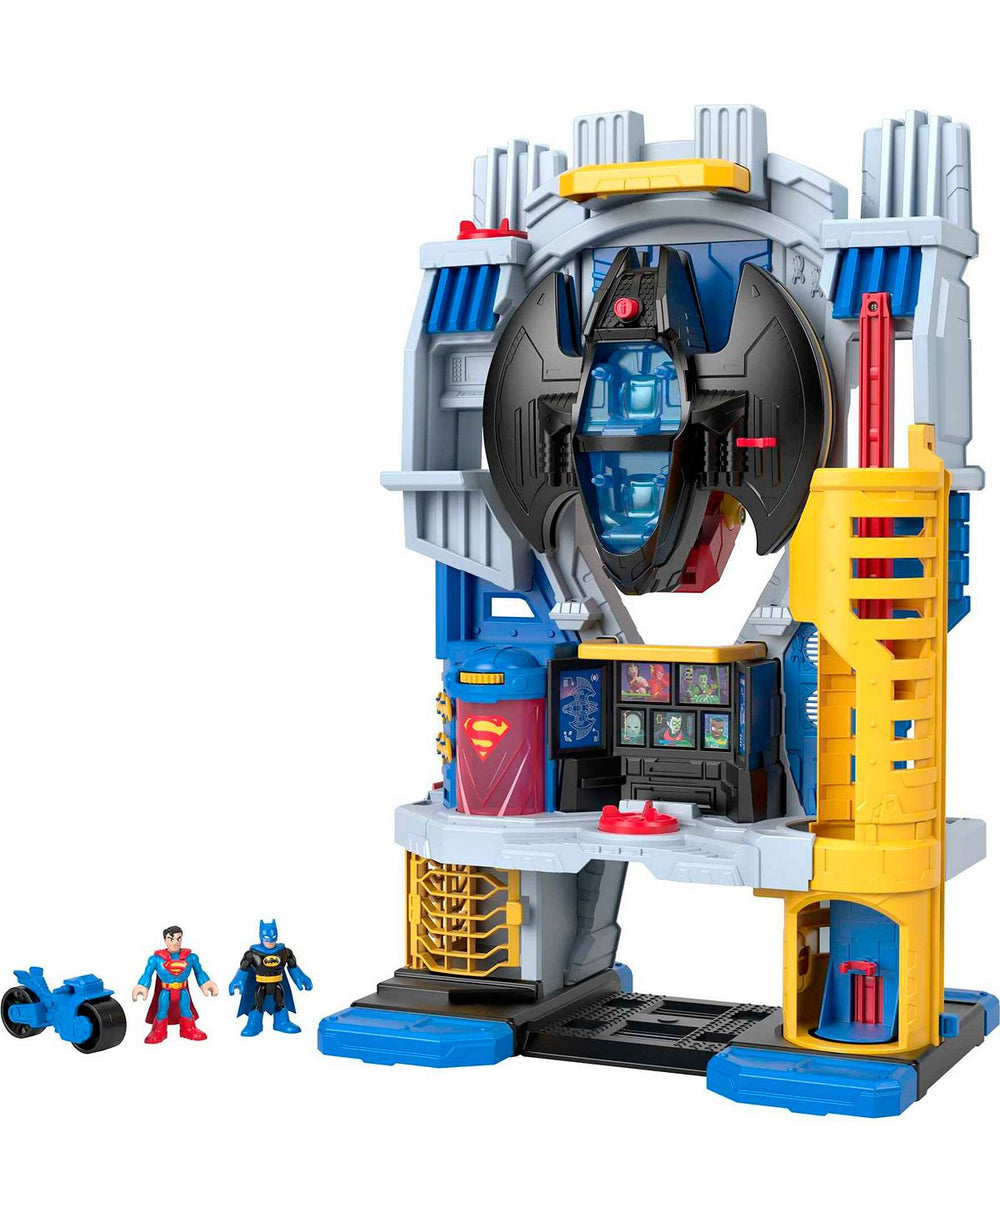 Imaginext DC Super Friends Ultimate Headquarters Playset with Batman and Superman Figures